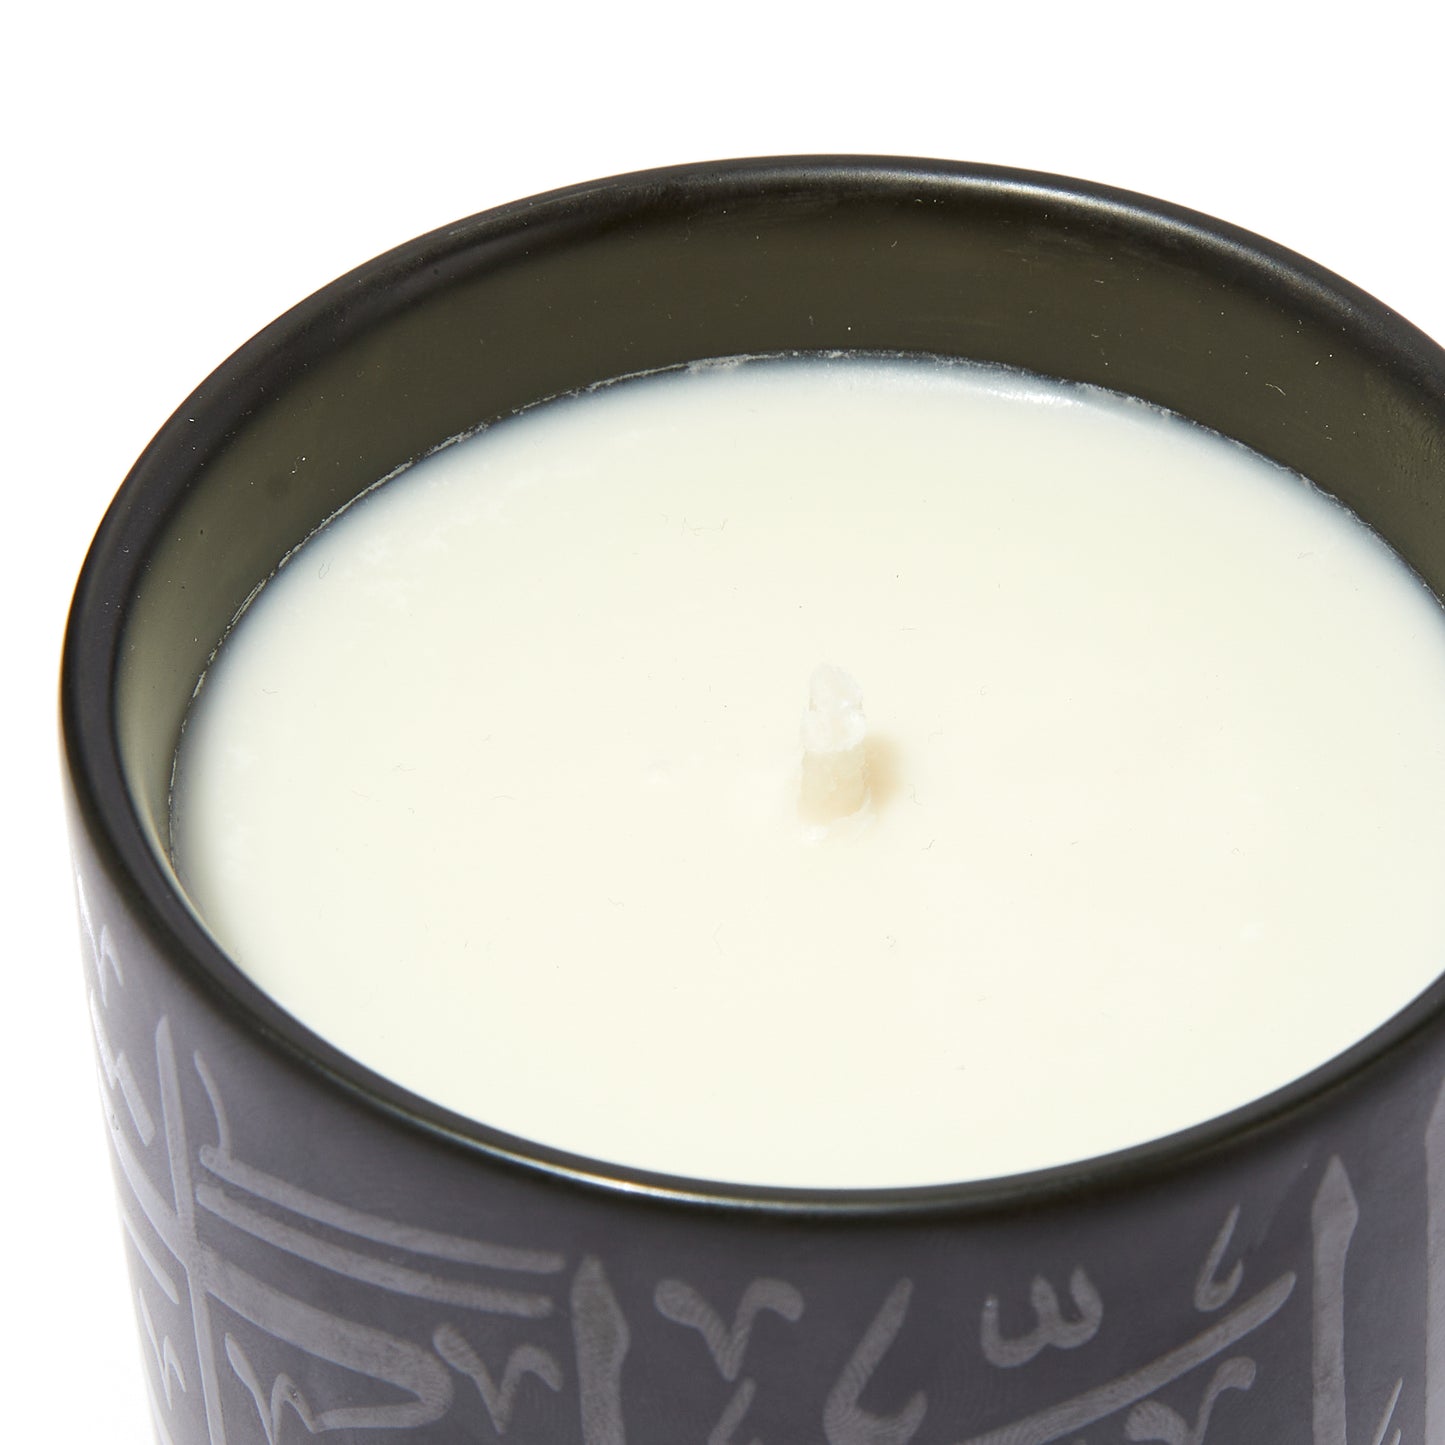 MUSEUM CALLIGRAPHY CANDLE | DARK